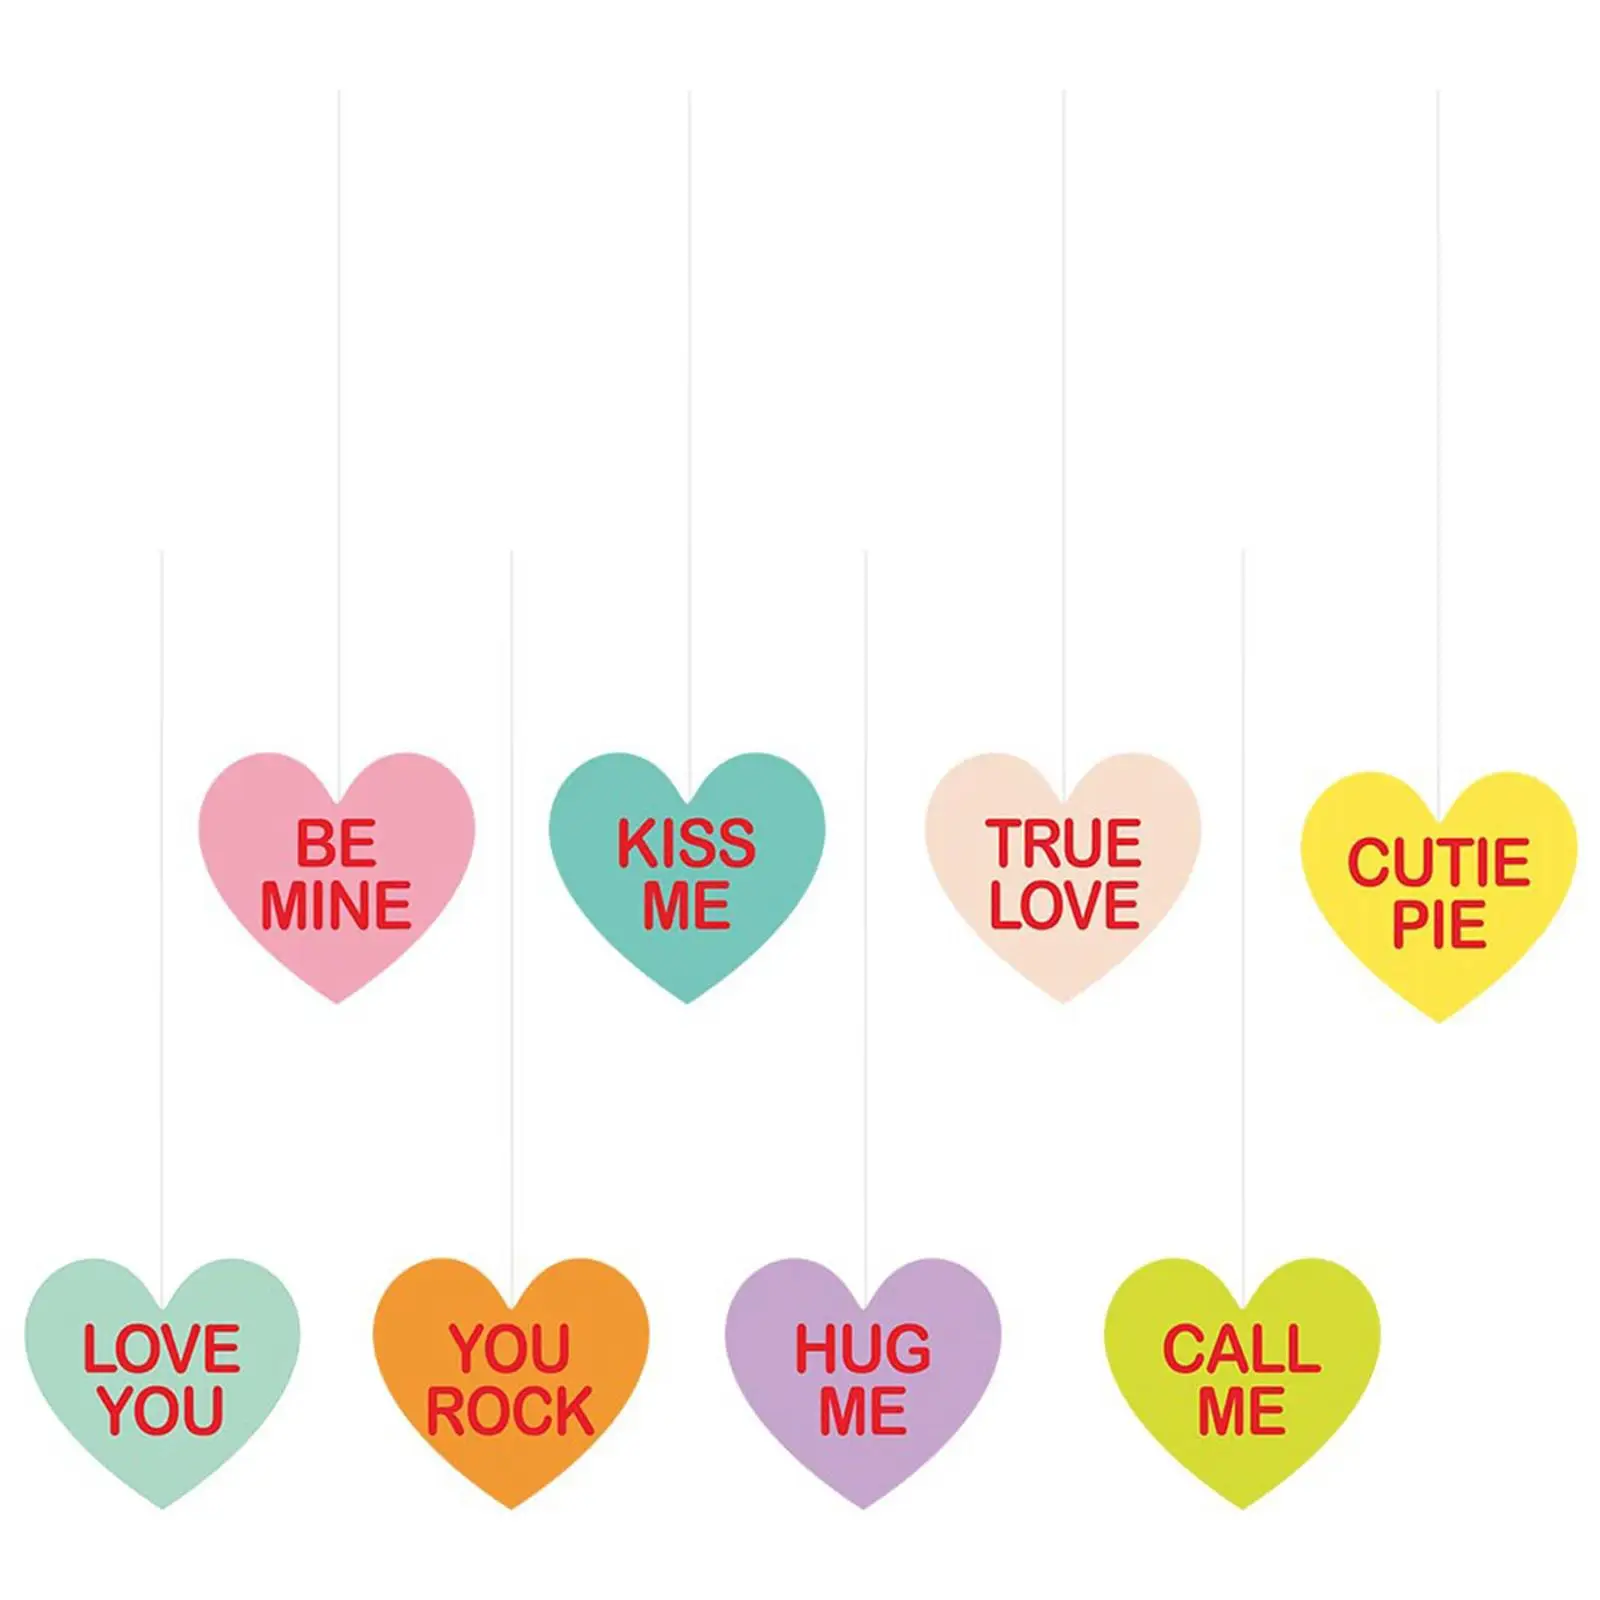 8x Valentines Day Hanging Hearts Sign Romantic Ornament Hanging Decorations for Indoor Outdoor Ceiling Home Window Engagement